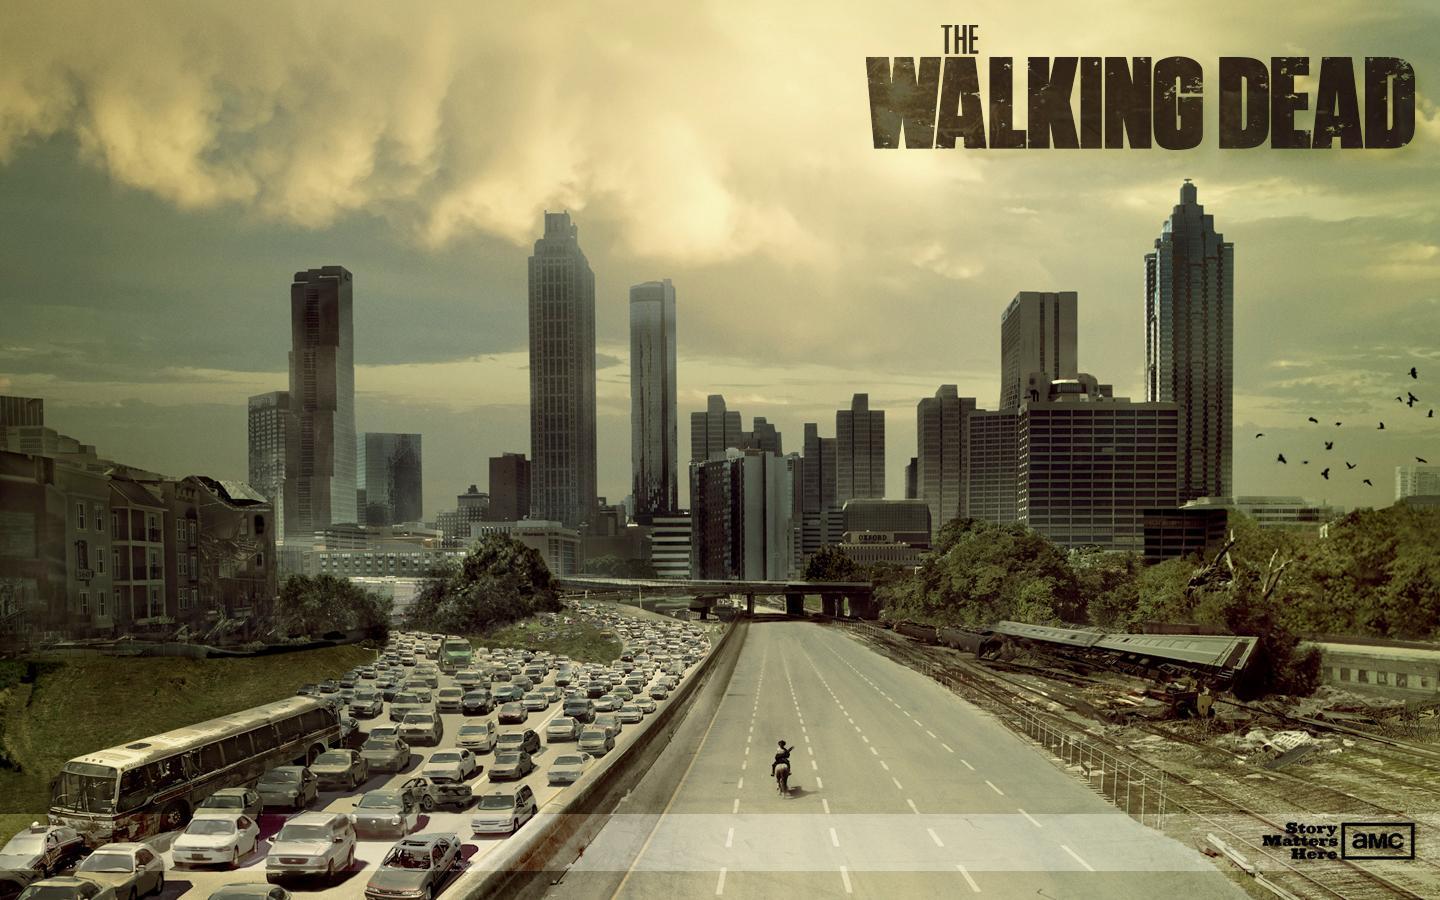 The Walking Dead Poster Backgrounds